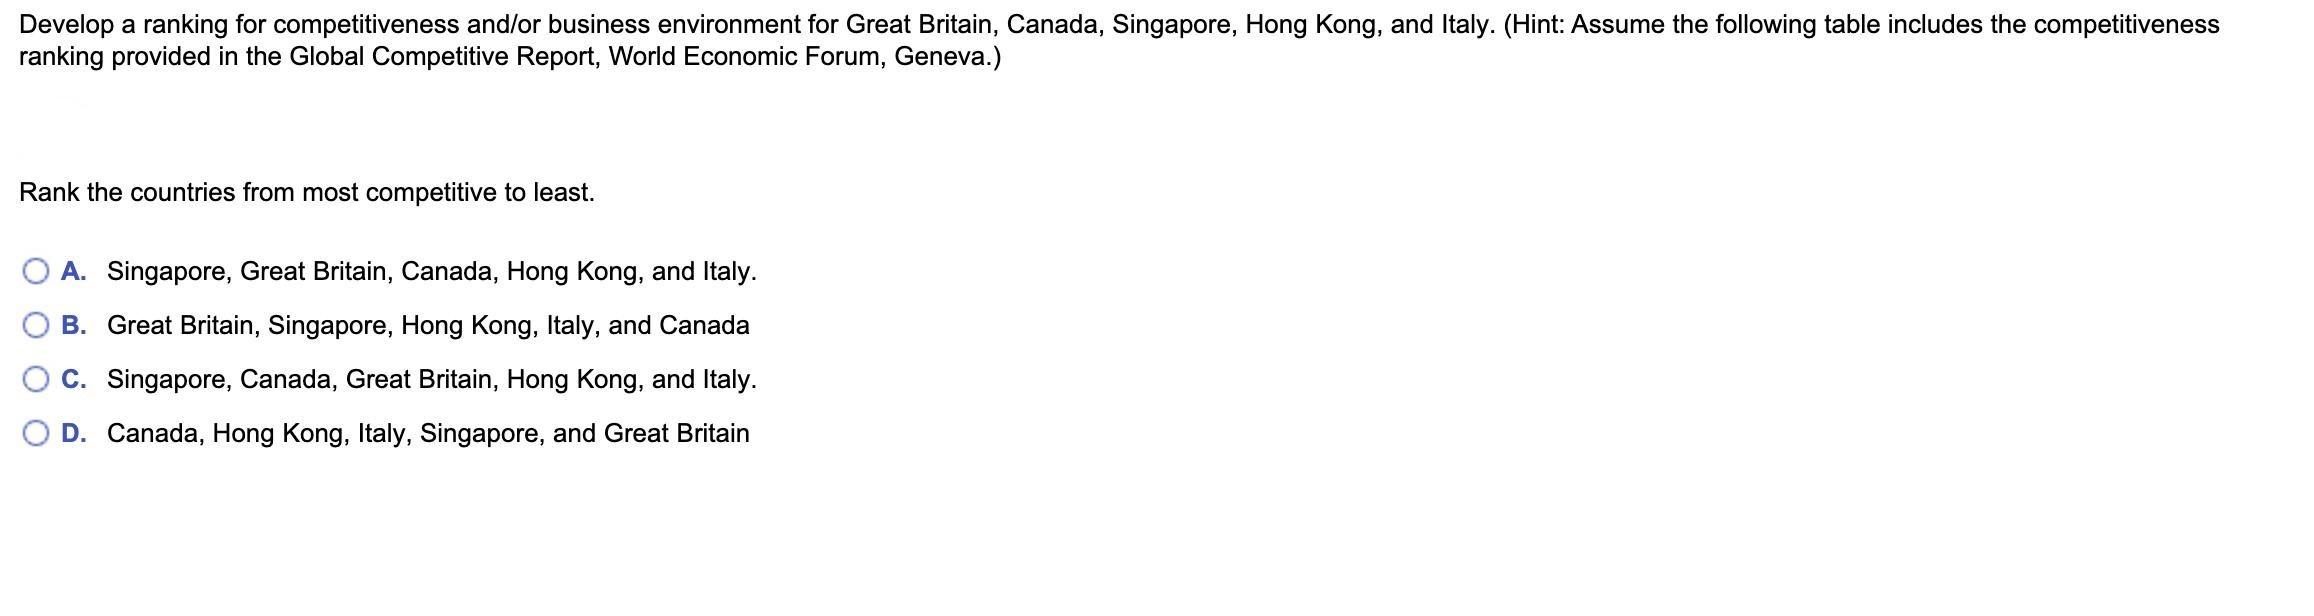 Develop a ranking for competitiveness and/or business environment for Great Britain, Canada, Singapore, Hong